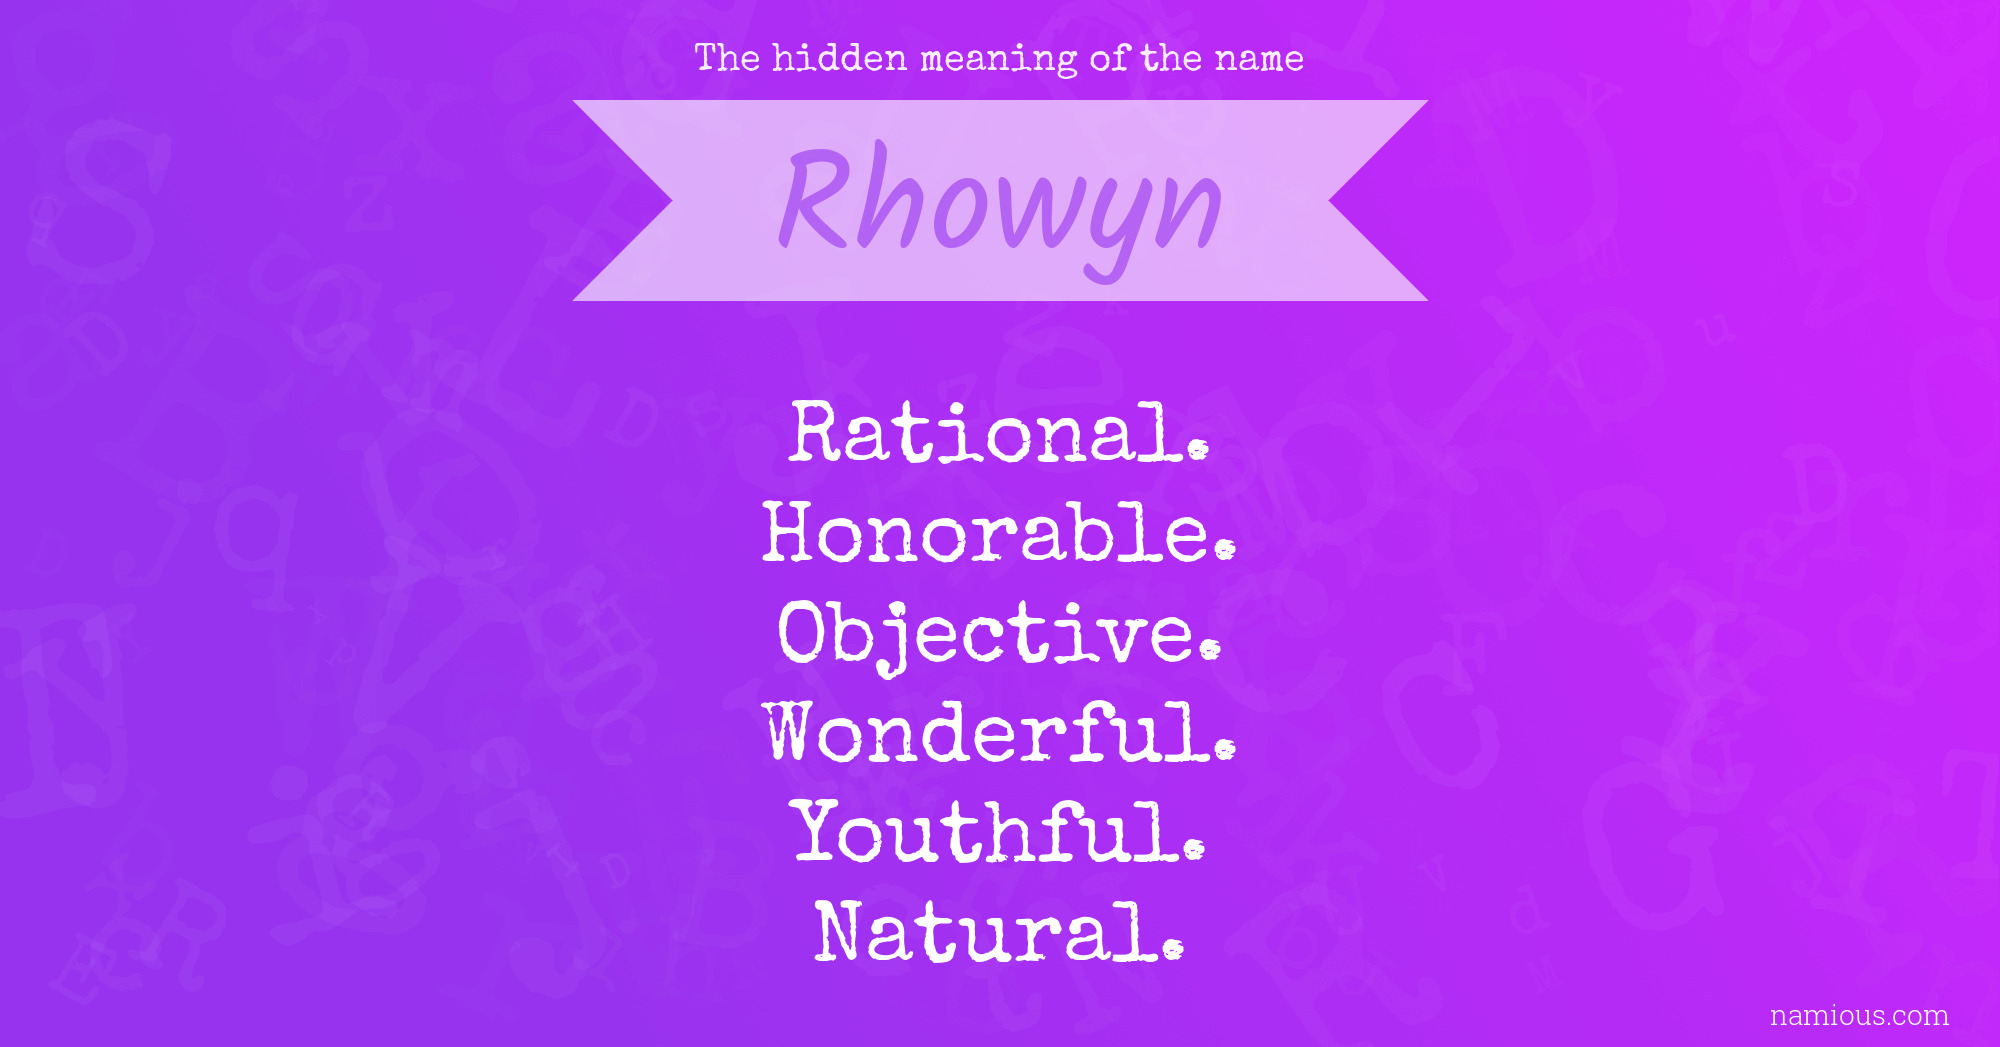 The hidden meaning of the name Rhowyn